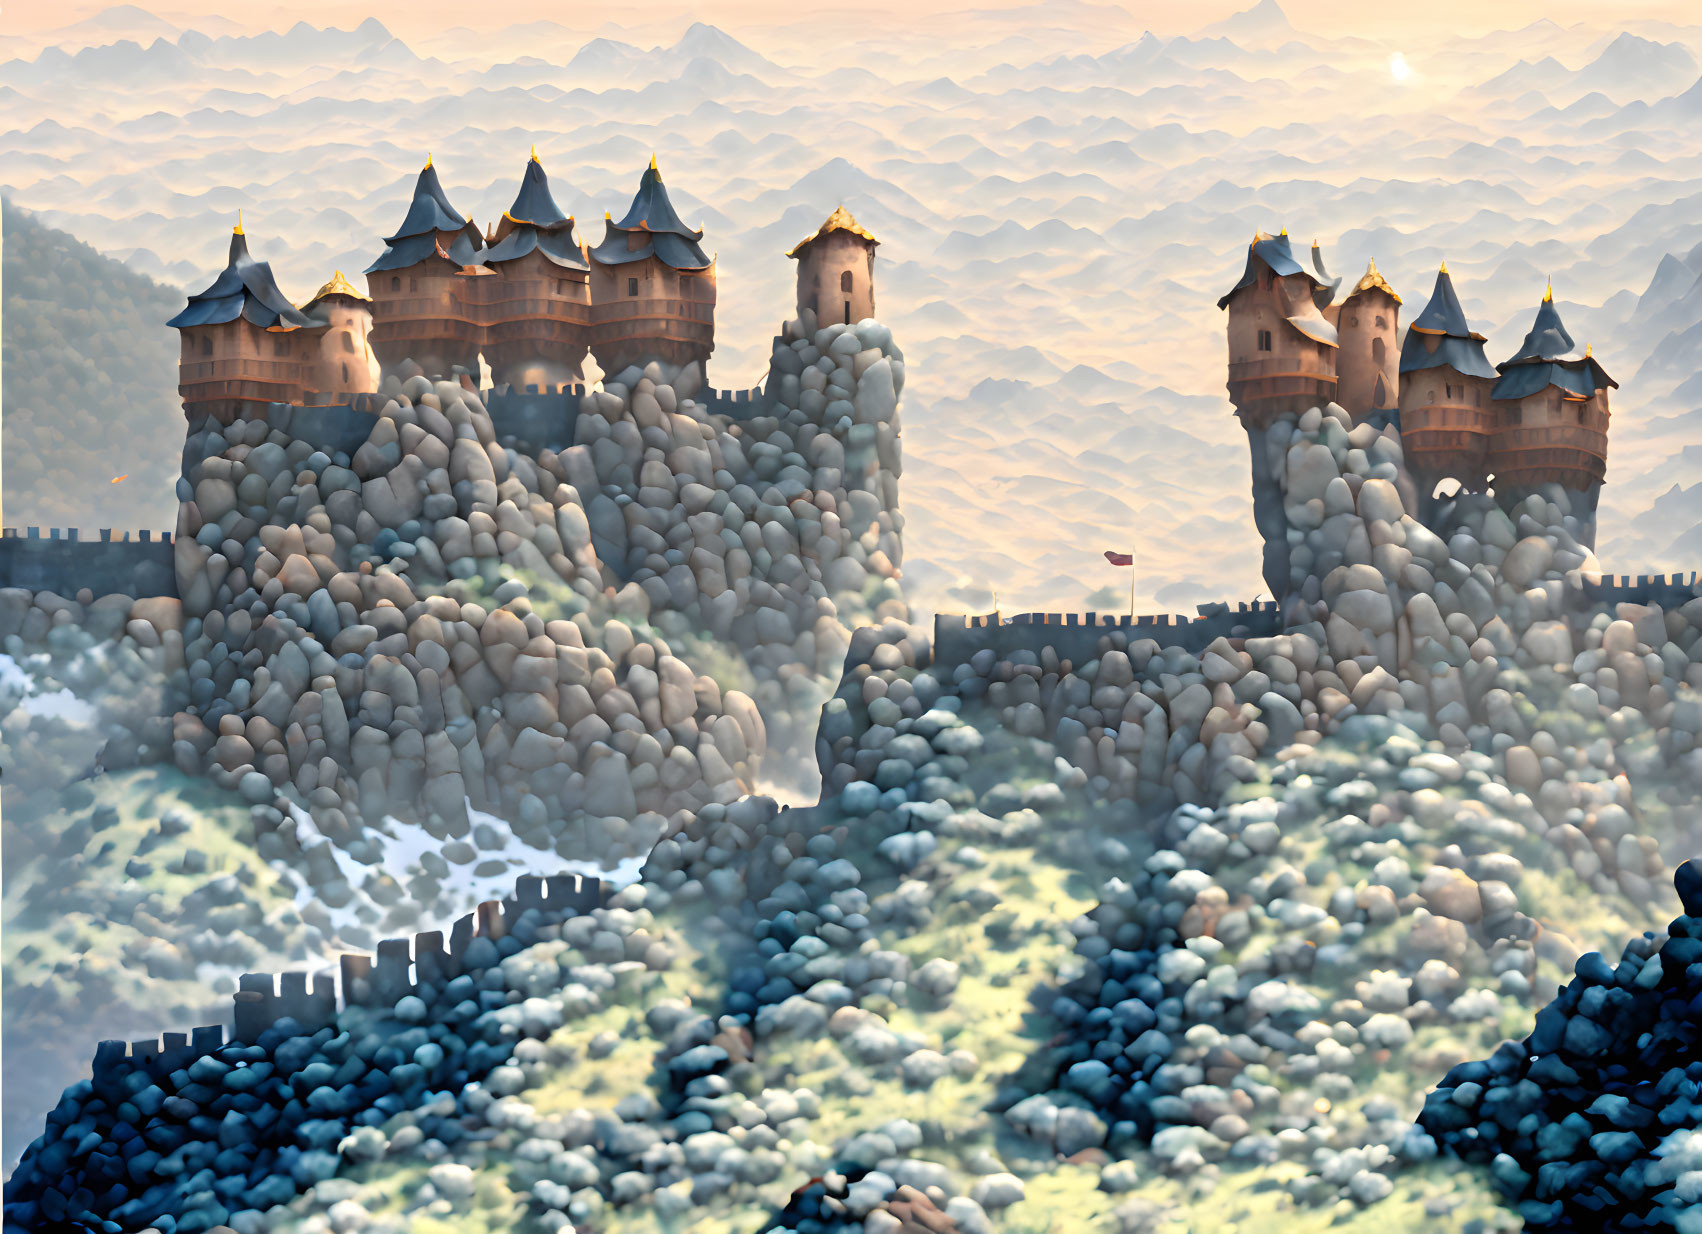 Surreal landscape with castle on stone boulders and layered hills